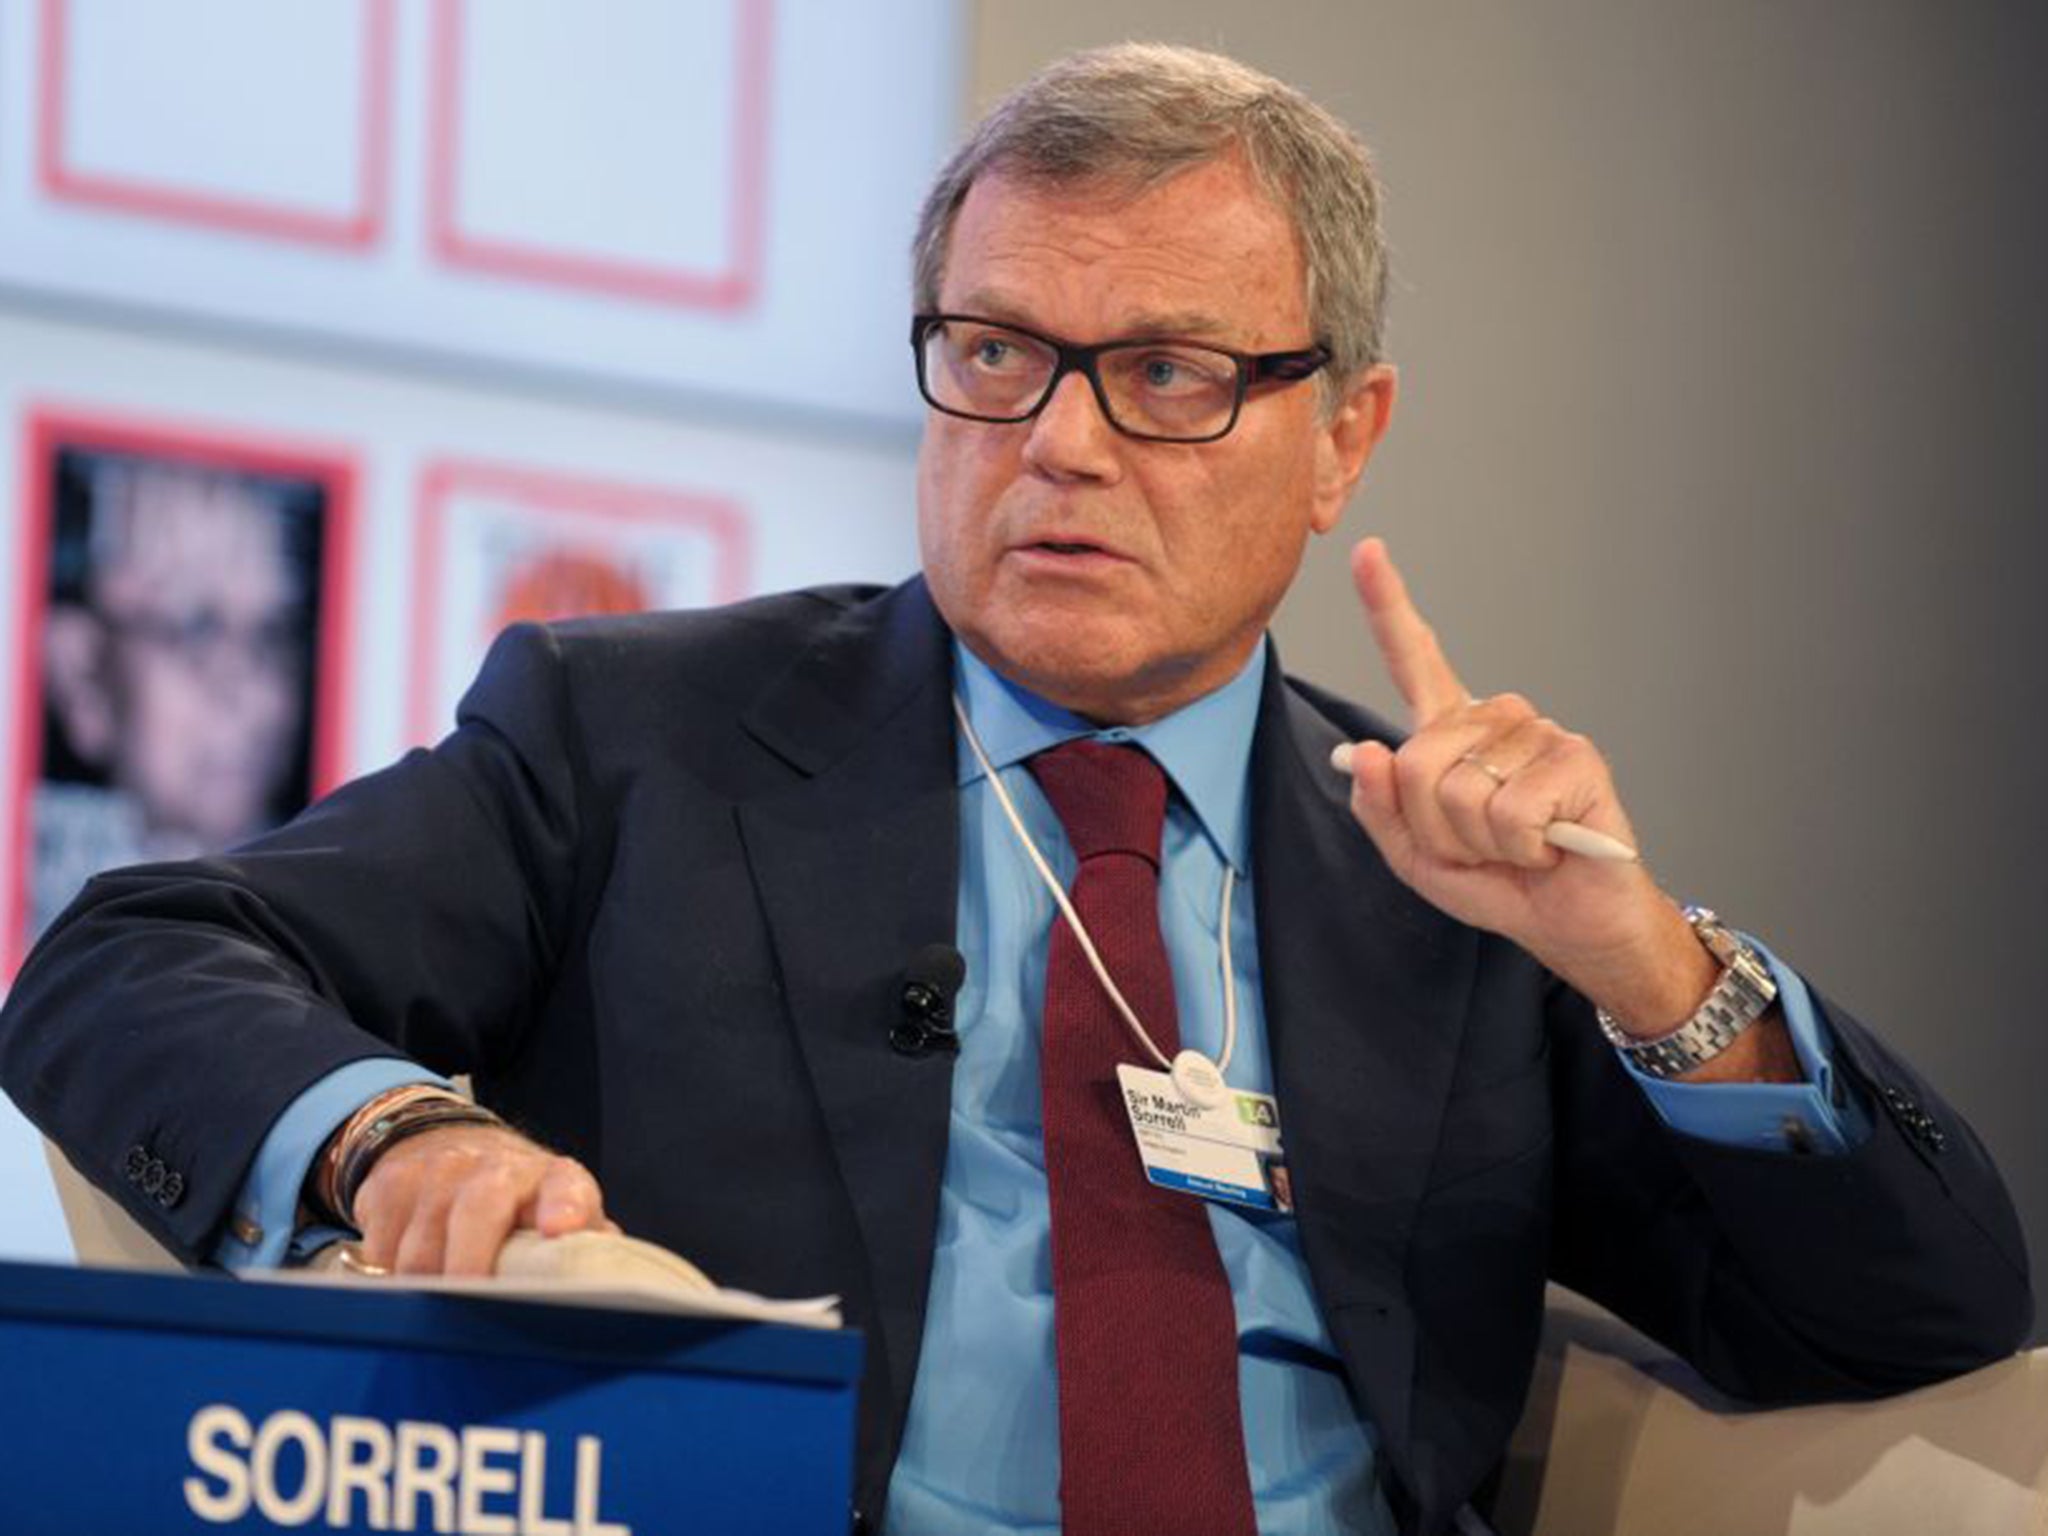 Sir Martin Sorrell: ‘If you were PM you’d be pretty pleased with George’